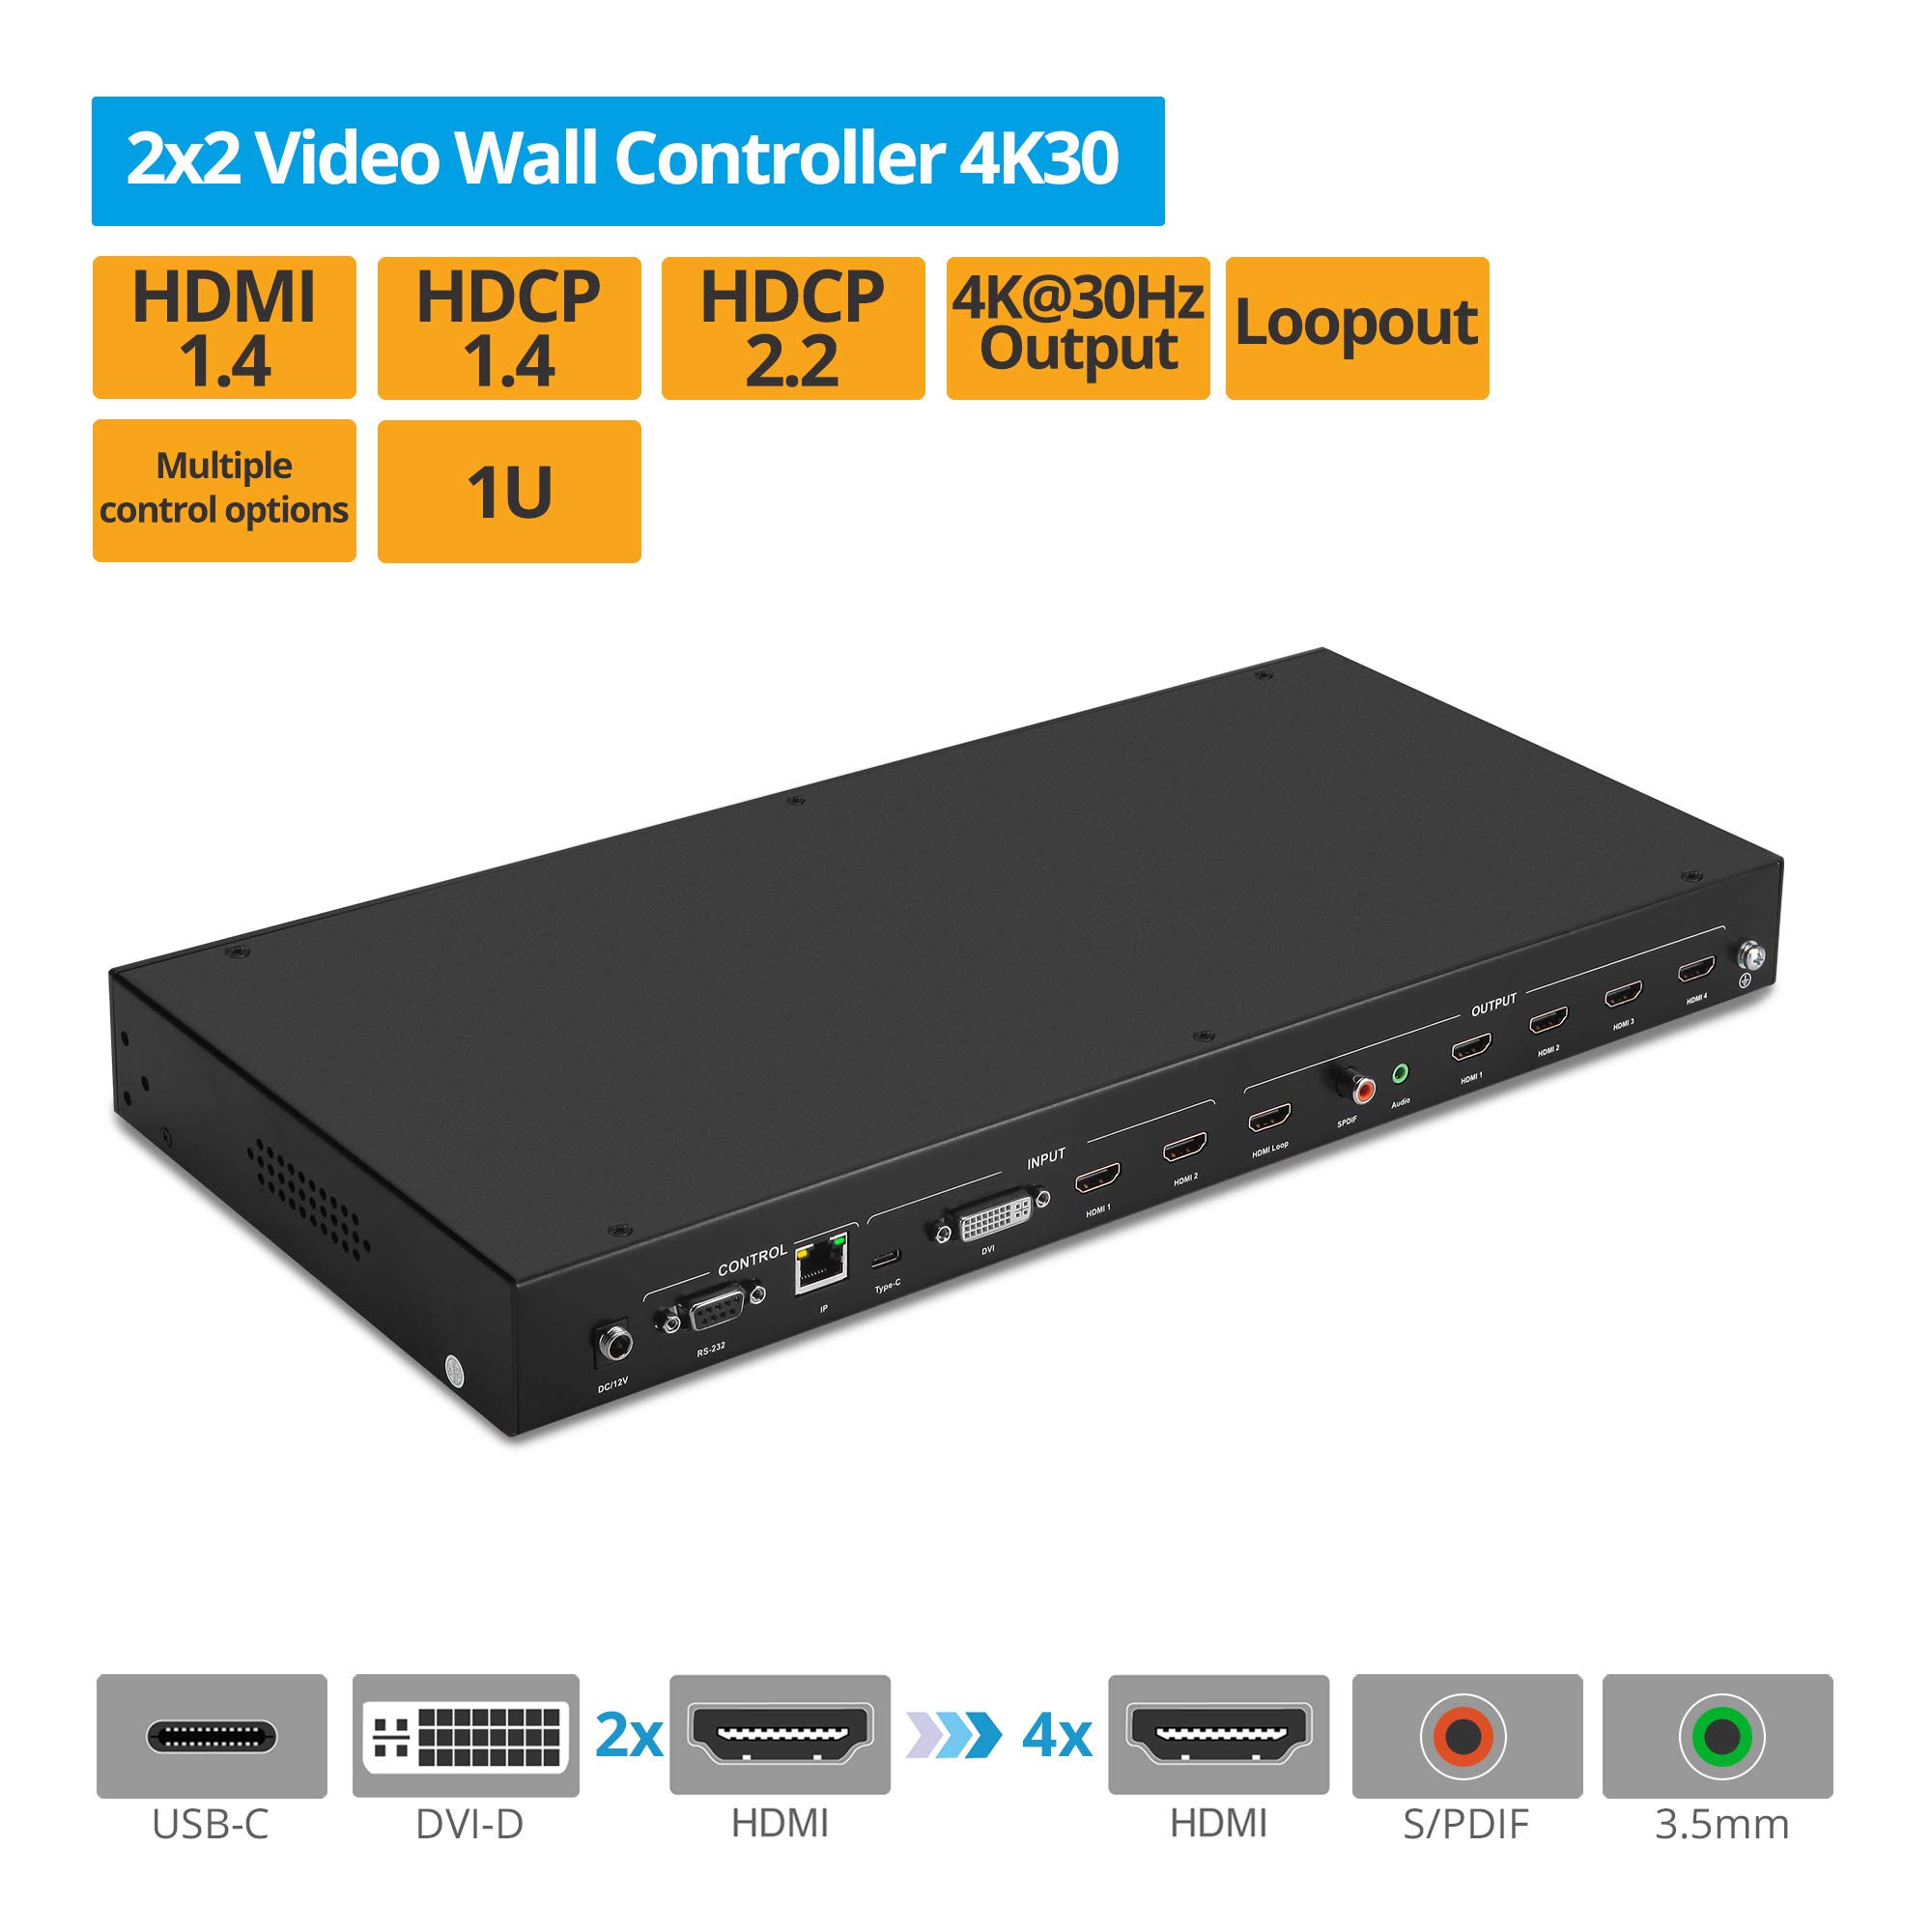 gofanco 2x2 Video Wall Processor Controller – Up to 4K 30Hz, Four Switchable Inputs, 9 Videowall Modes, Cascade up to 10x10, Loopout, 180º Rotation, Edge Correction, 1U, Audio Extractor (Videowall22)